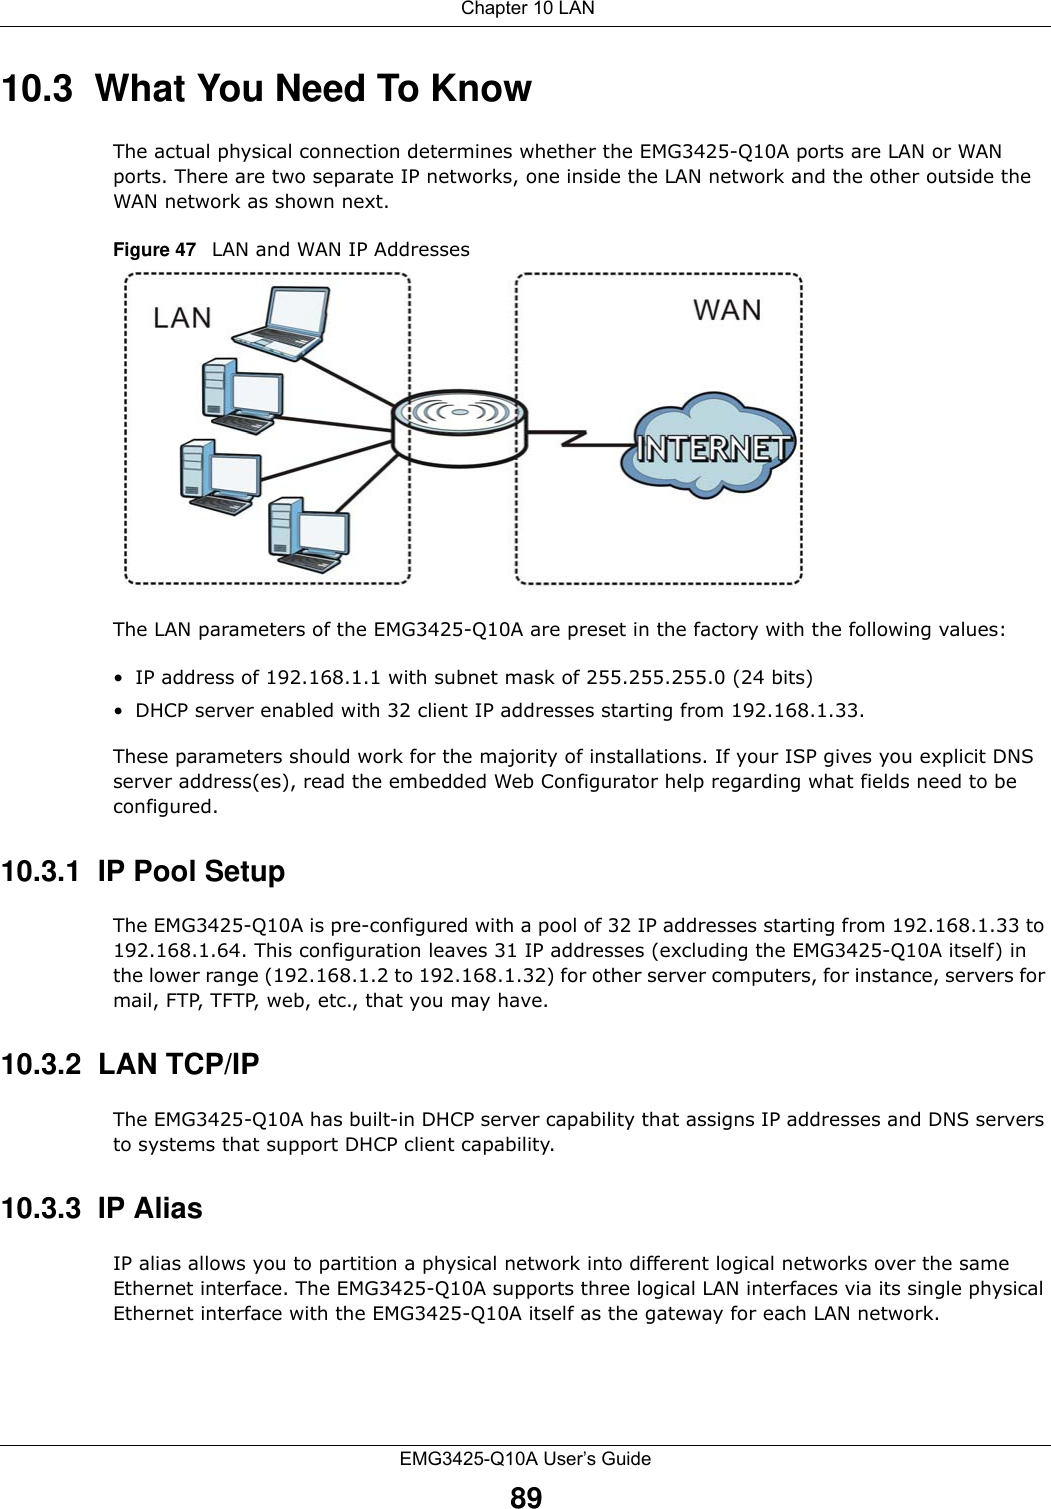  Chapter 10 LANEMG3425-Q10A User’s Guide8910.3  What You Need To KnowThe actual physical connection determines whether the EMG3425-Q10A ports are LAN or WAN ports. There are two separate IP networks, one inside the LAN network and the other outside the WAN network as shown next.Figure 47   LAN and WAN IP AddressesThe LAN parameters of the EMG3425-Q10A are preset in the factory with the following values:• IP address of 192.168.1.1 with subnet mask of 255.255.255.0 (24 bits)• DHCP server enabled with 32 client IP addresses starting from 192.168.1.33. These parameters should work for the majority of installations. If your ISP gives you explicit DNS server address(es), read the embedded Web Configurator help regarding what fields need to be configured.10.3.1  IP Pool SetupThe EMG3425-Q10A is pre-configured with a pool of 32 IP addresses starting from 192.168.1.33 to 192.168.1.64. This configuration leaves 31 IP addresses (excluding the EMG3425-Q10A itself) in the lower range (192.168.1.2 to 192.168.1.32) for other server computers, for instance, servers for mail, FTP, TFTP, web, etc., that you may have.10.3.2  LAN TCP/IP The EMG3425-Q10A has built-in DHCP server capability that assigns IP addresses and DNS servers to systems that support DHCP client capability.10.3.3  IP AliasIP alias allows you to partition a physical network into different logical networks over the same Ethernet interface. The EMG3425-Q10A supports three logical LAN interfaces via its single physical Ethernet interface with the EMG3425-Q10A itself as the gateway for each LAN network.